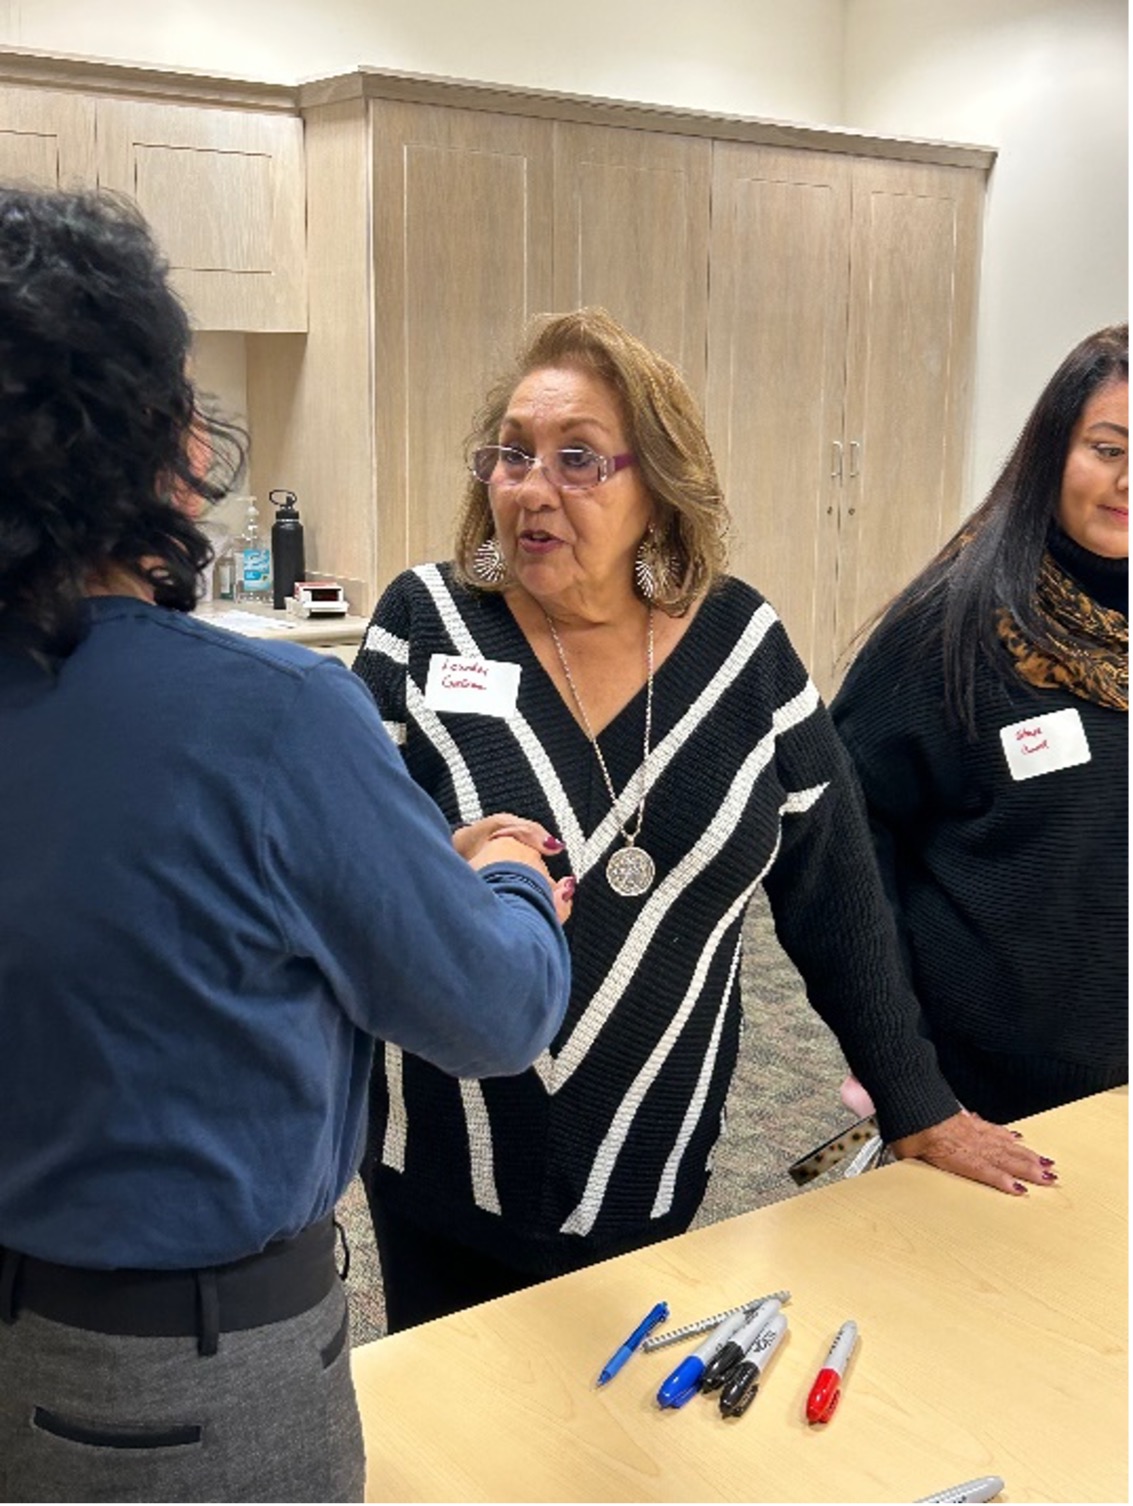 River Authority Board Member Lourdes Galvan meets with constituents during Westside Creeks Open House